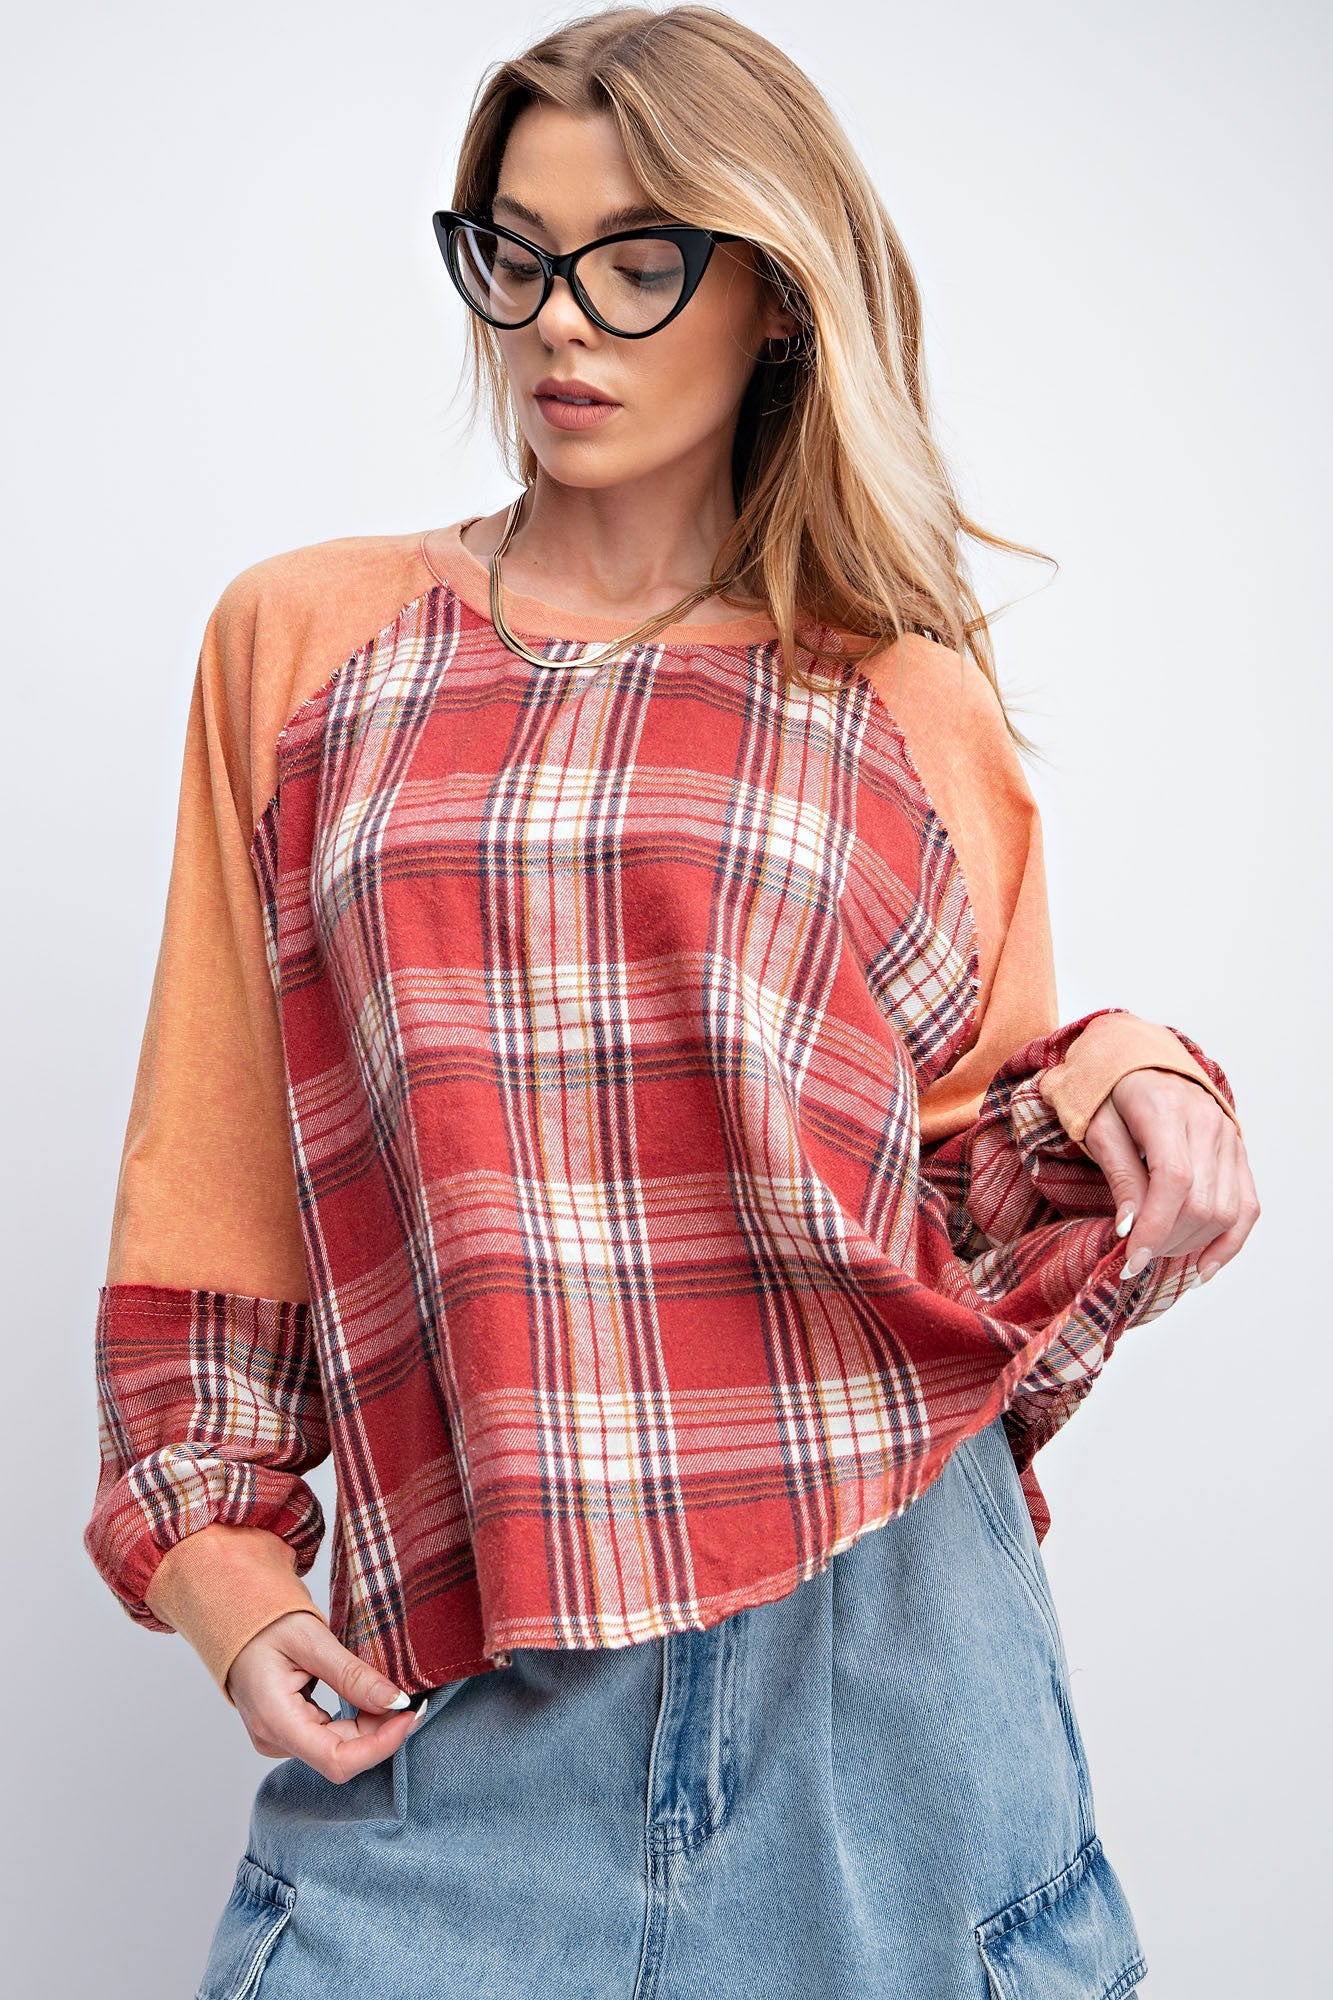 Easel Coral Red Plaid Mix Mineral Washed Rounded Neck Loose Fit Pullover Top - Roulhac Fashion Boutique